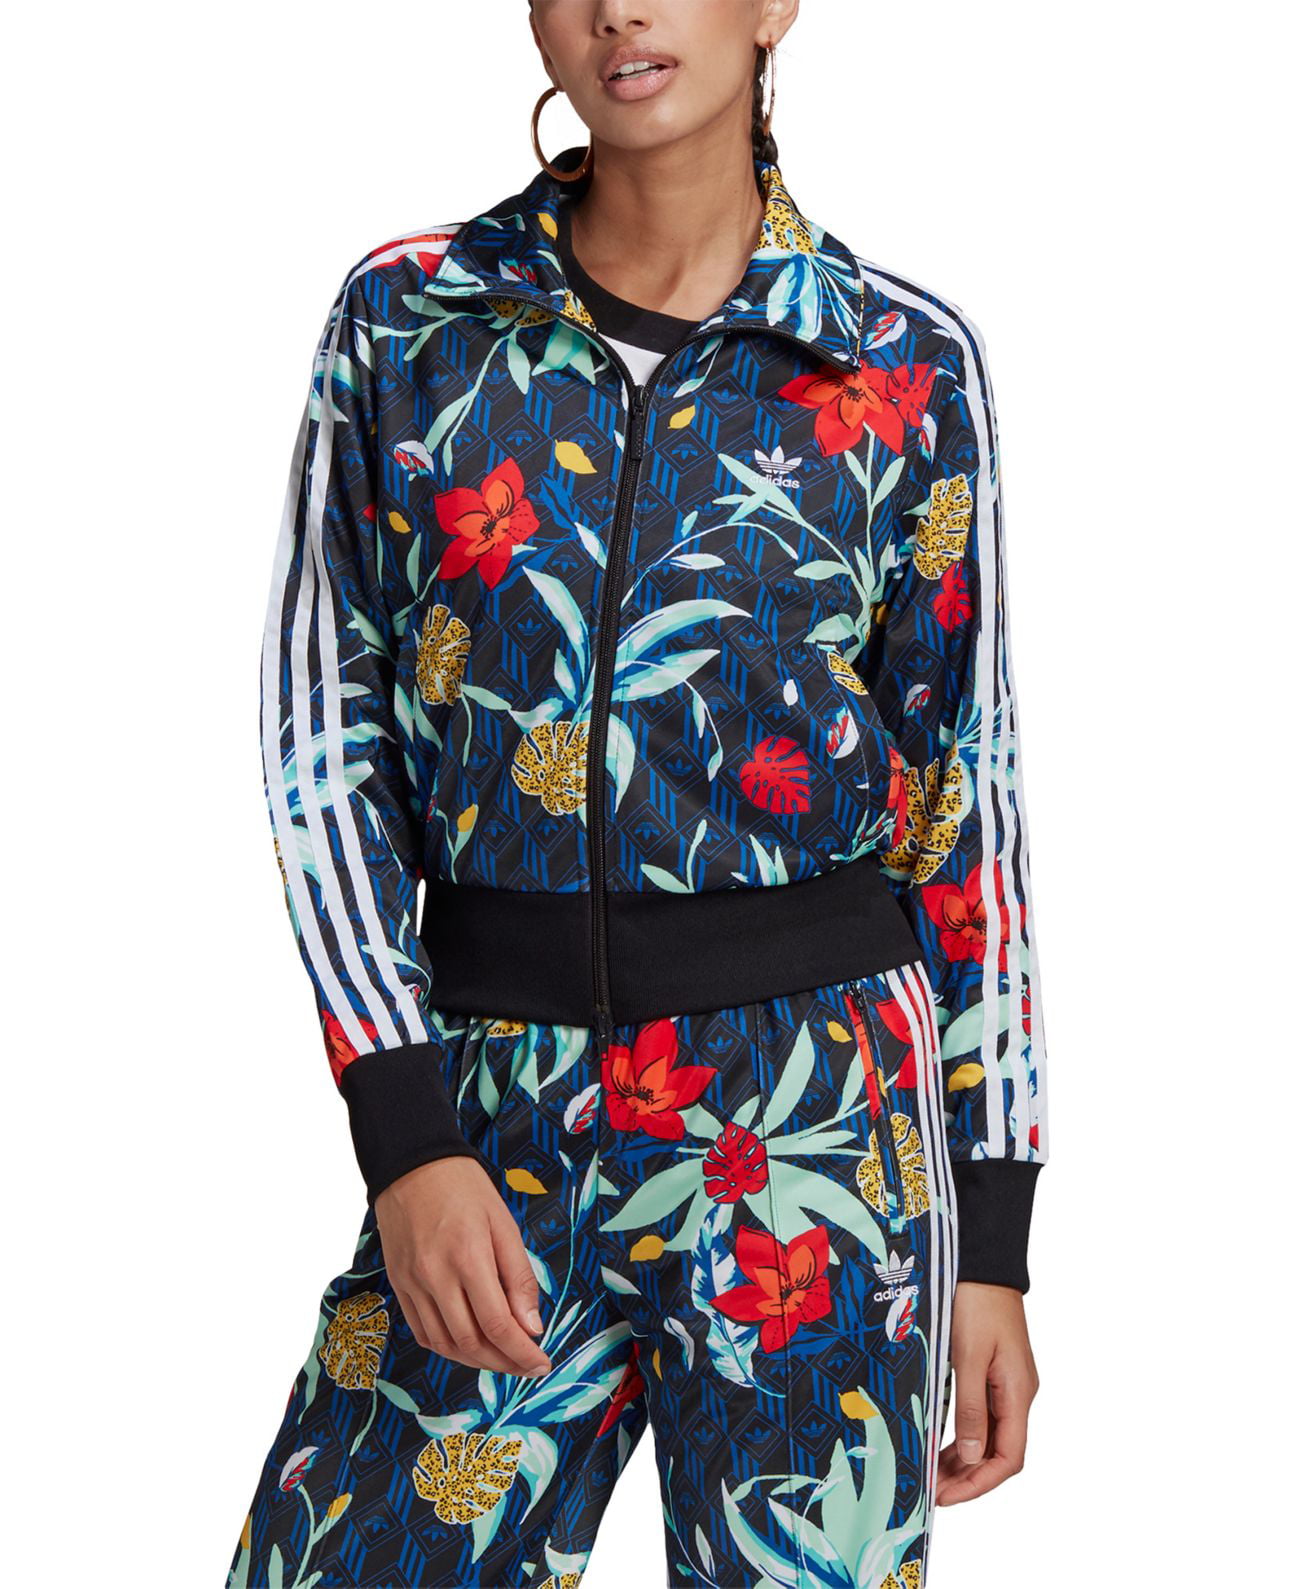 adidas track jacket women's floral